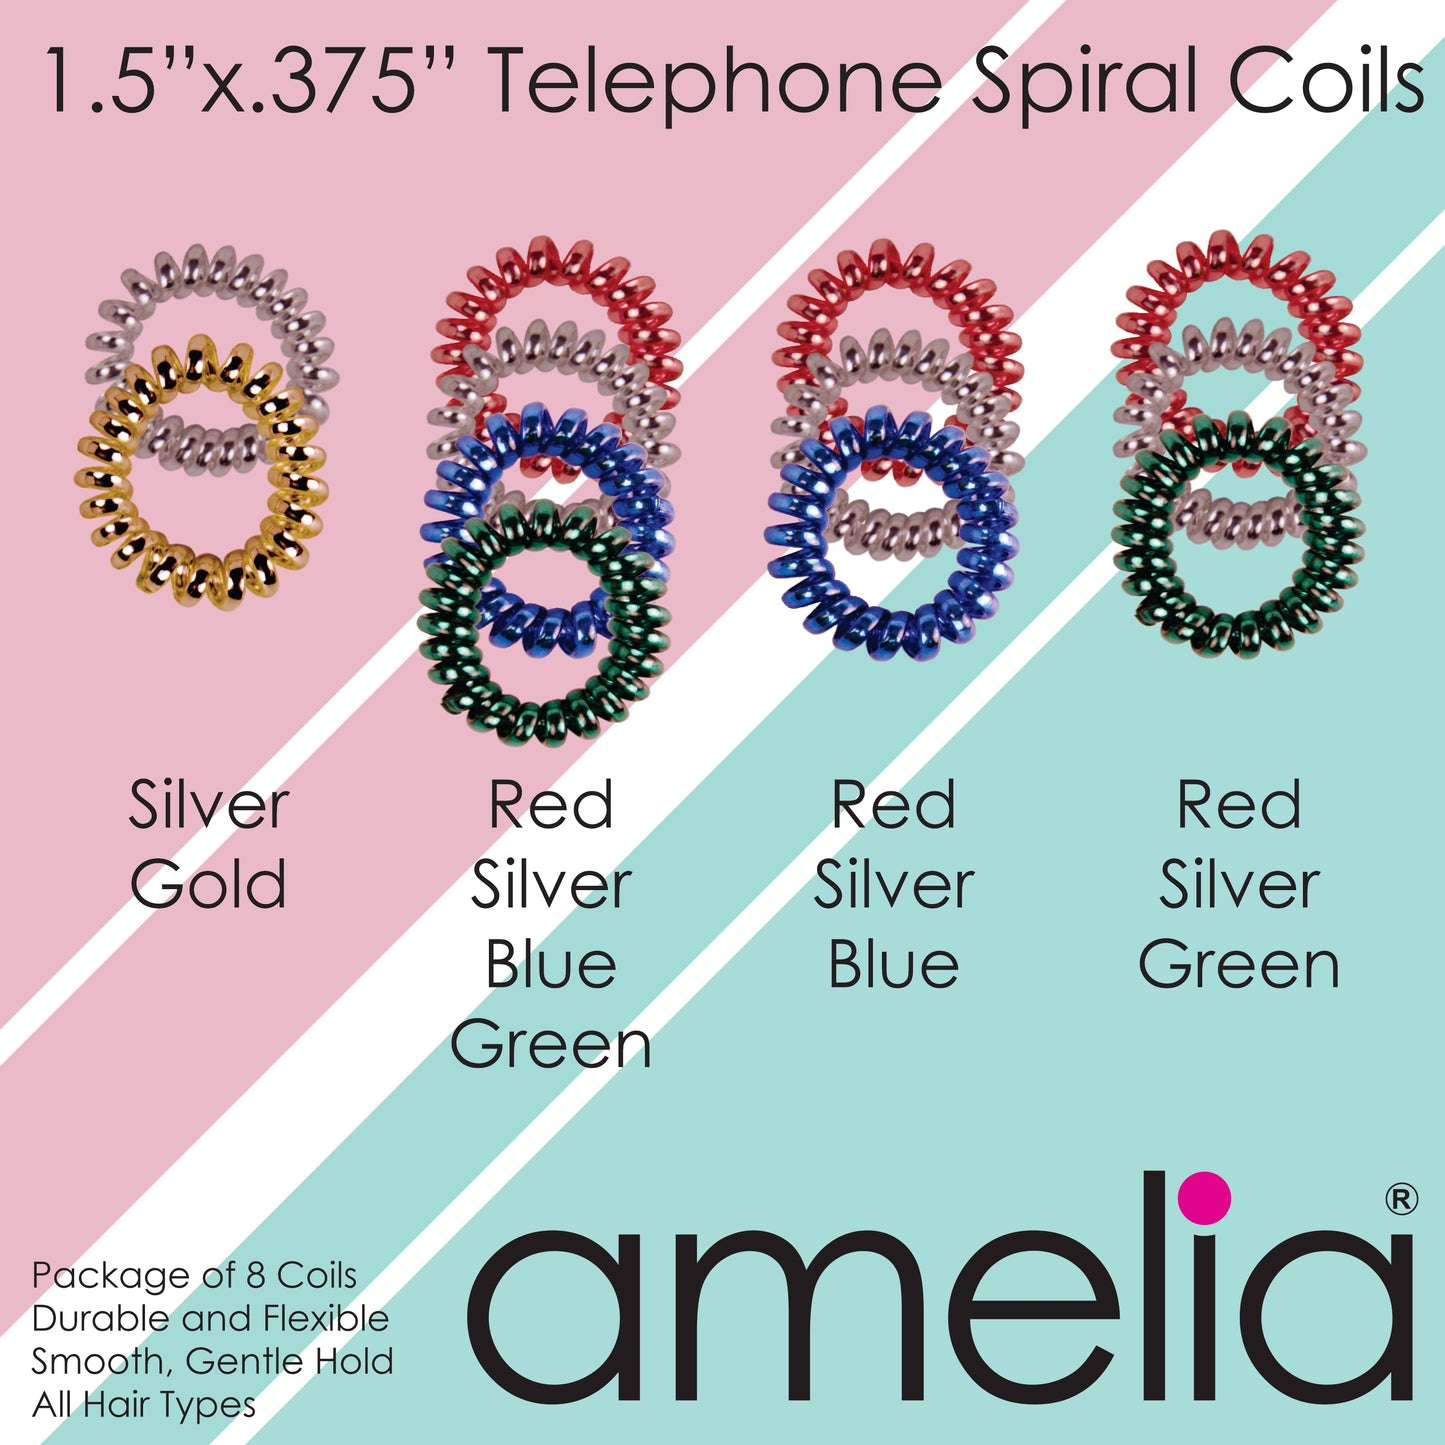 Amelia Beauty, 8 Small Shinny Elastic Hair Telephone Cord Coils, 1.5in Diameter Spiral Hair Ties, Strong Hold, Gentle on Hair, Gold